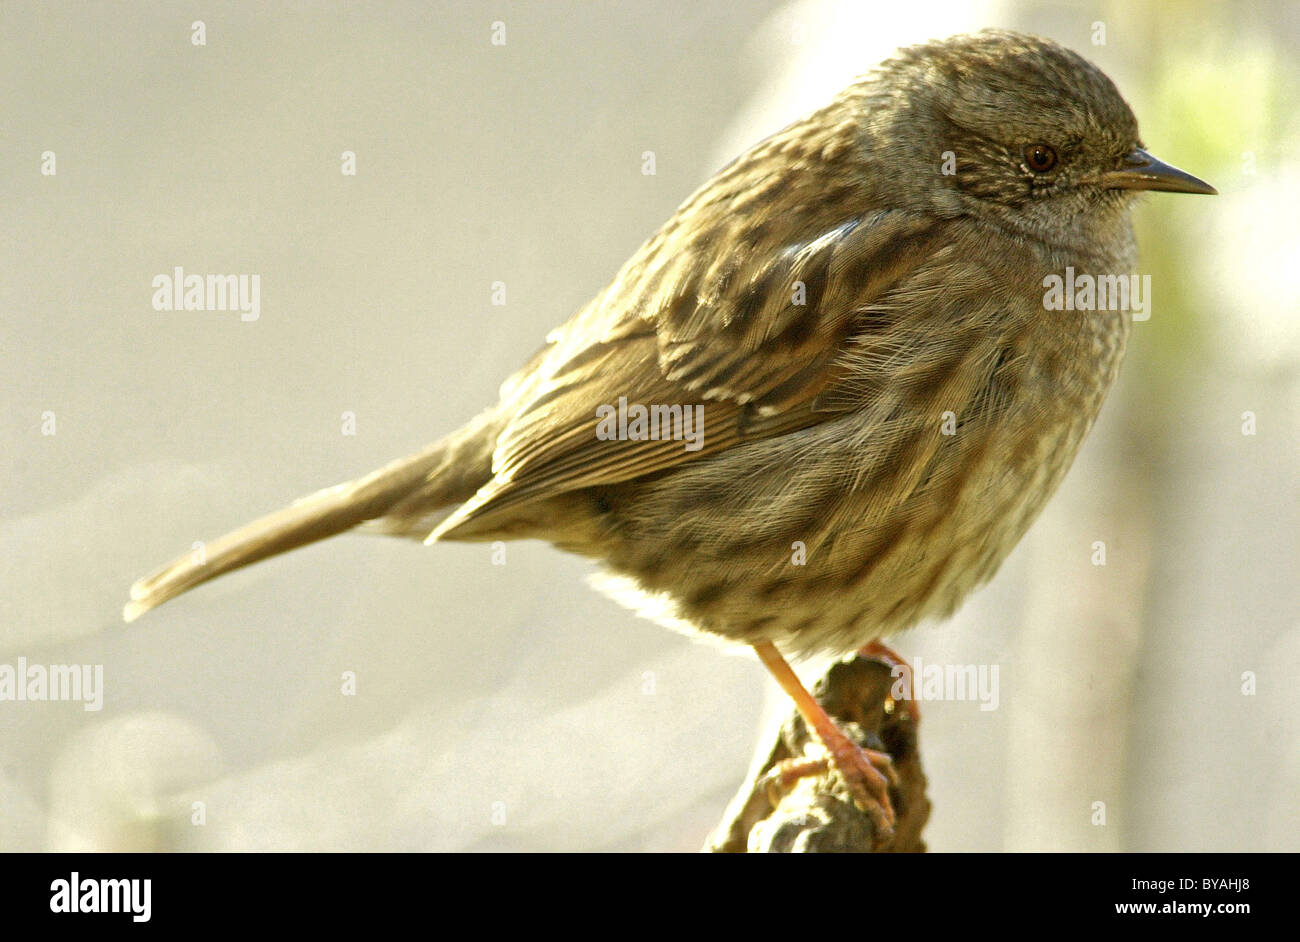 Dunnock also known as a Hedge Sparrow or Hedge Accentor is an endangered species of British bird. Stock Photo